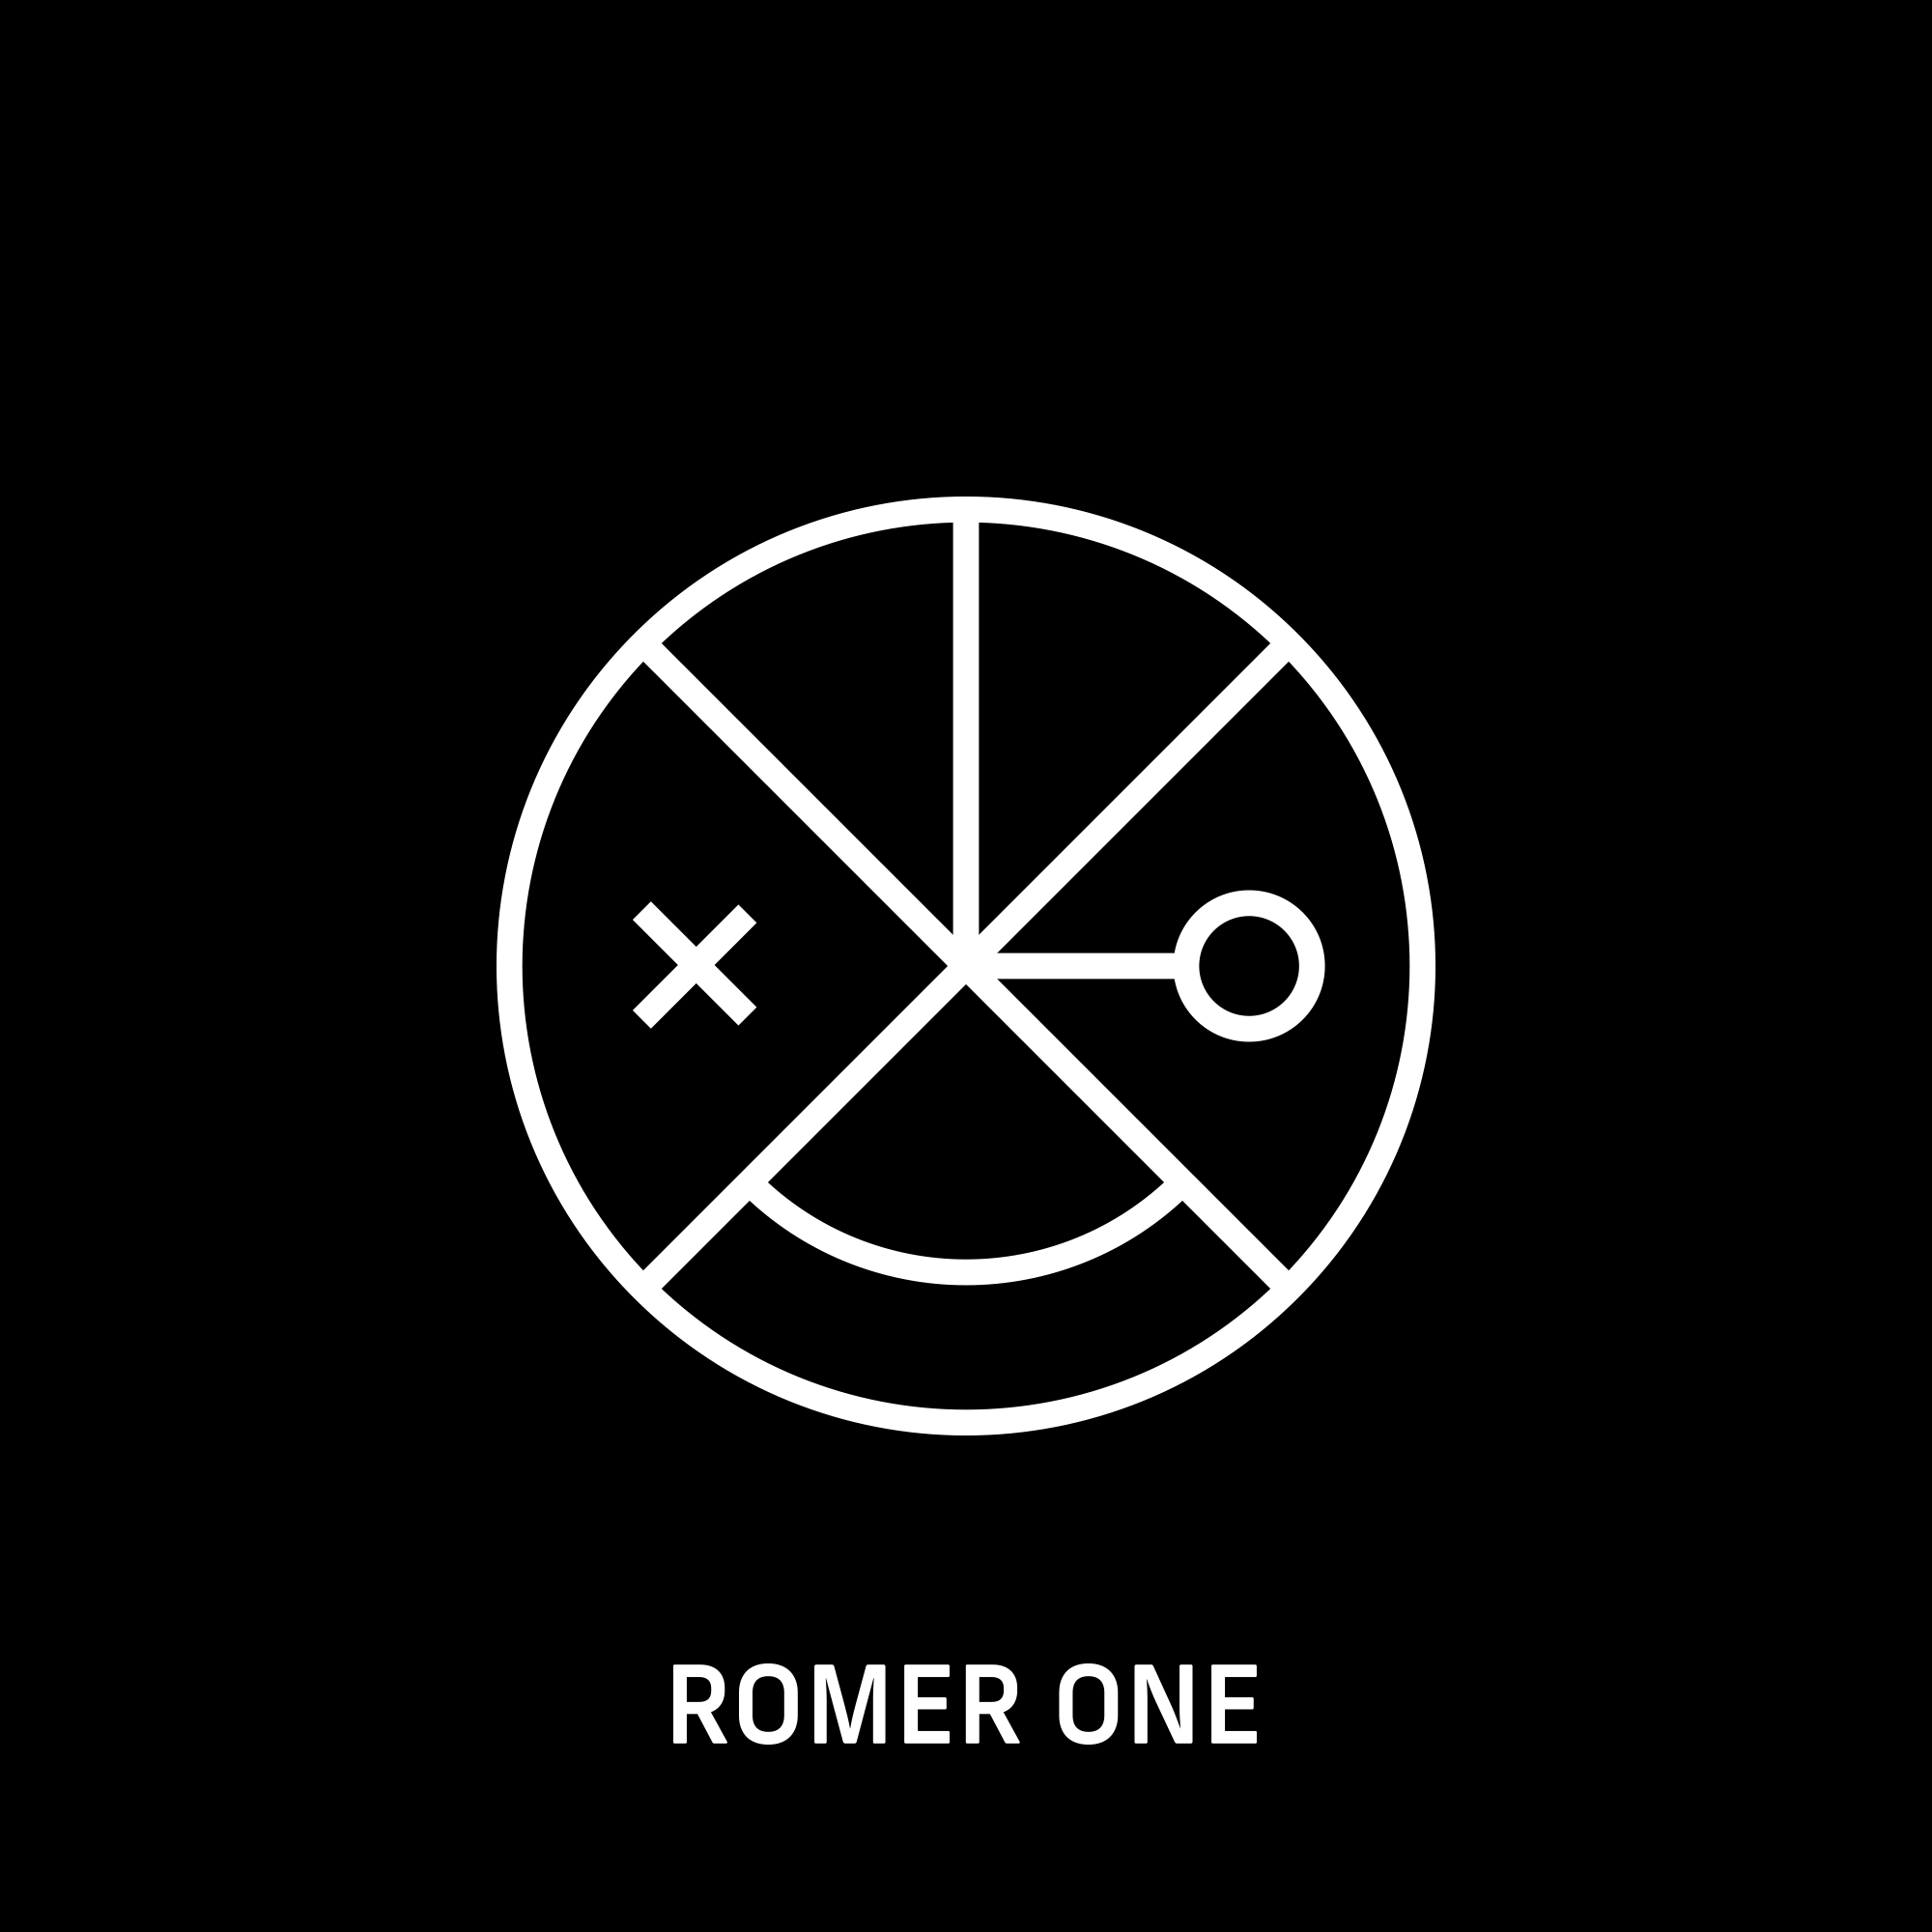 andreas_weiland_romer_one